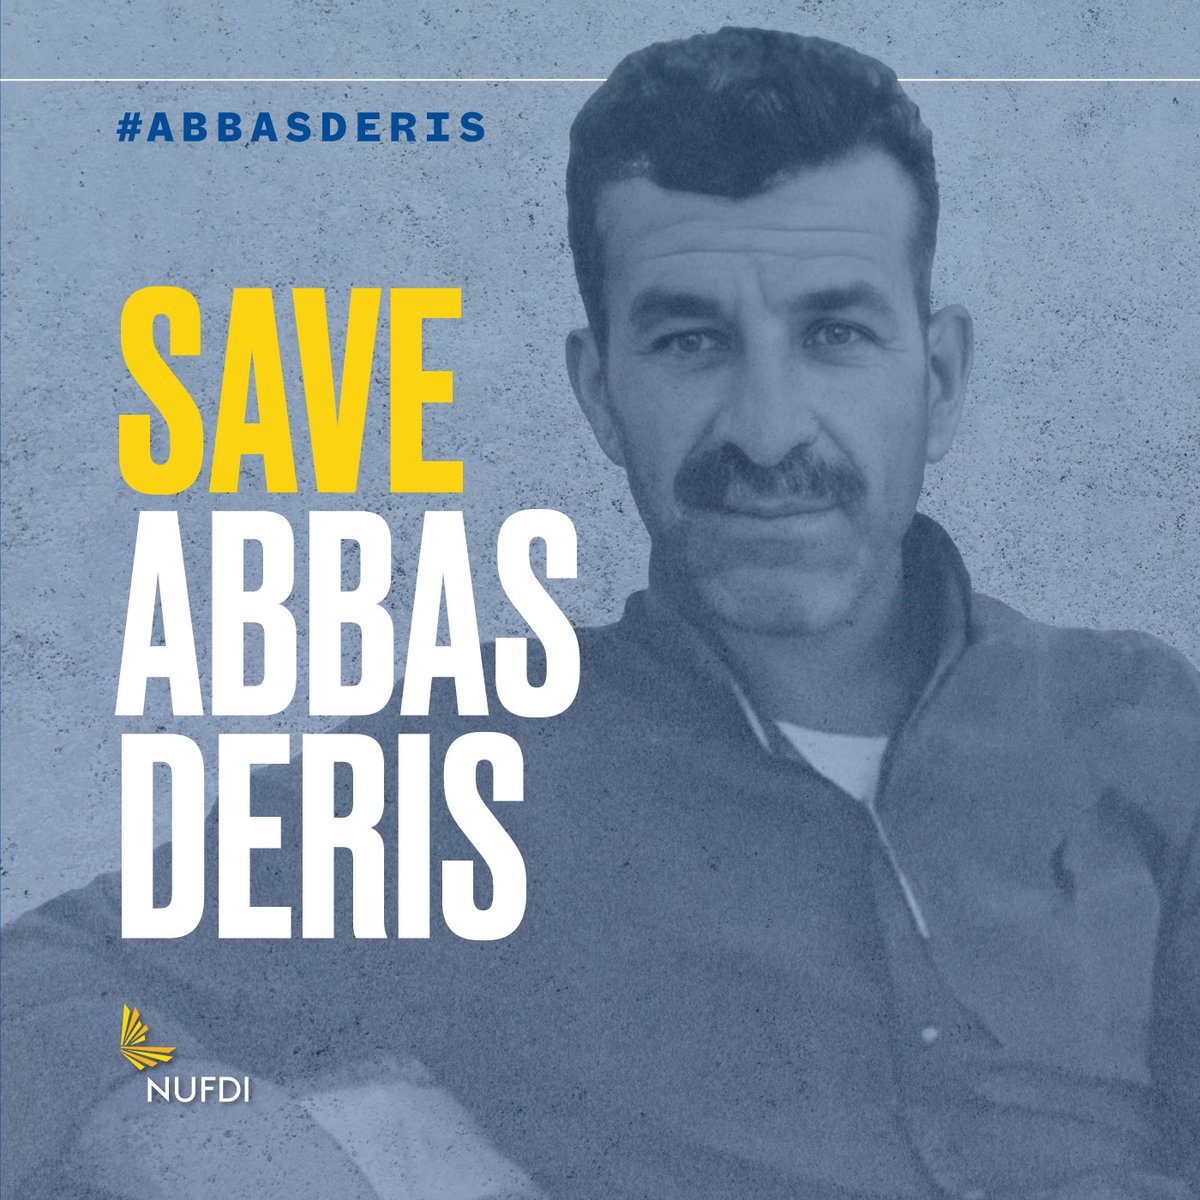 #AbbasDeris took to the streets in #BloodyNovember of 2019 to fight for #Iran's freedom. Now the Islamic Republic, after a sham trial and torture, is slated to kill him. #SaveAbbasDeris #عباس_دریس